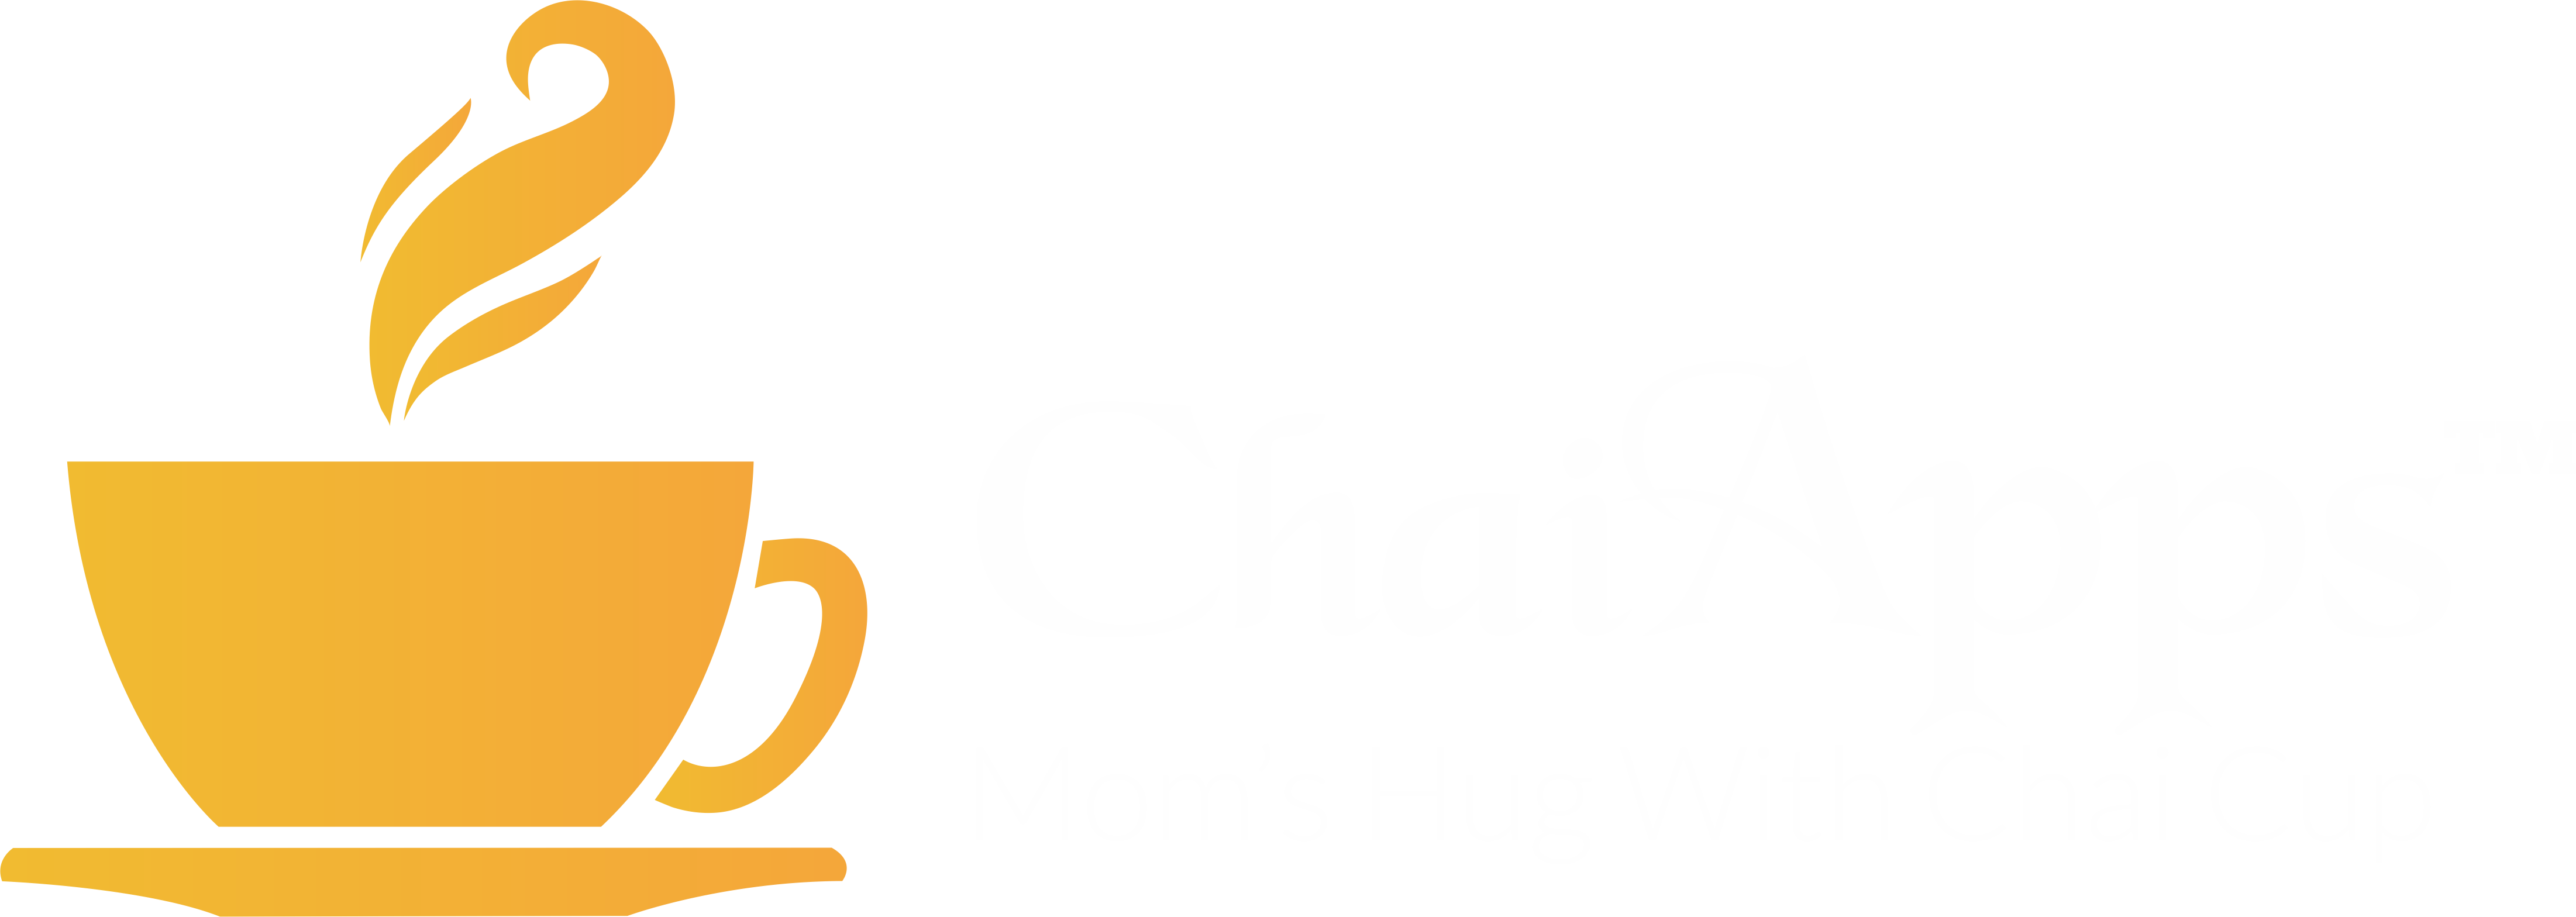 ChaiApps Logo 2